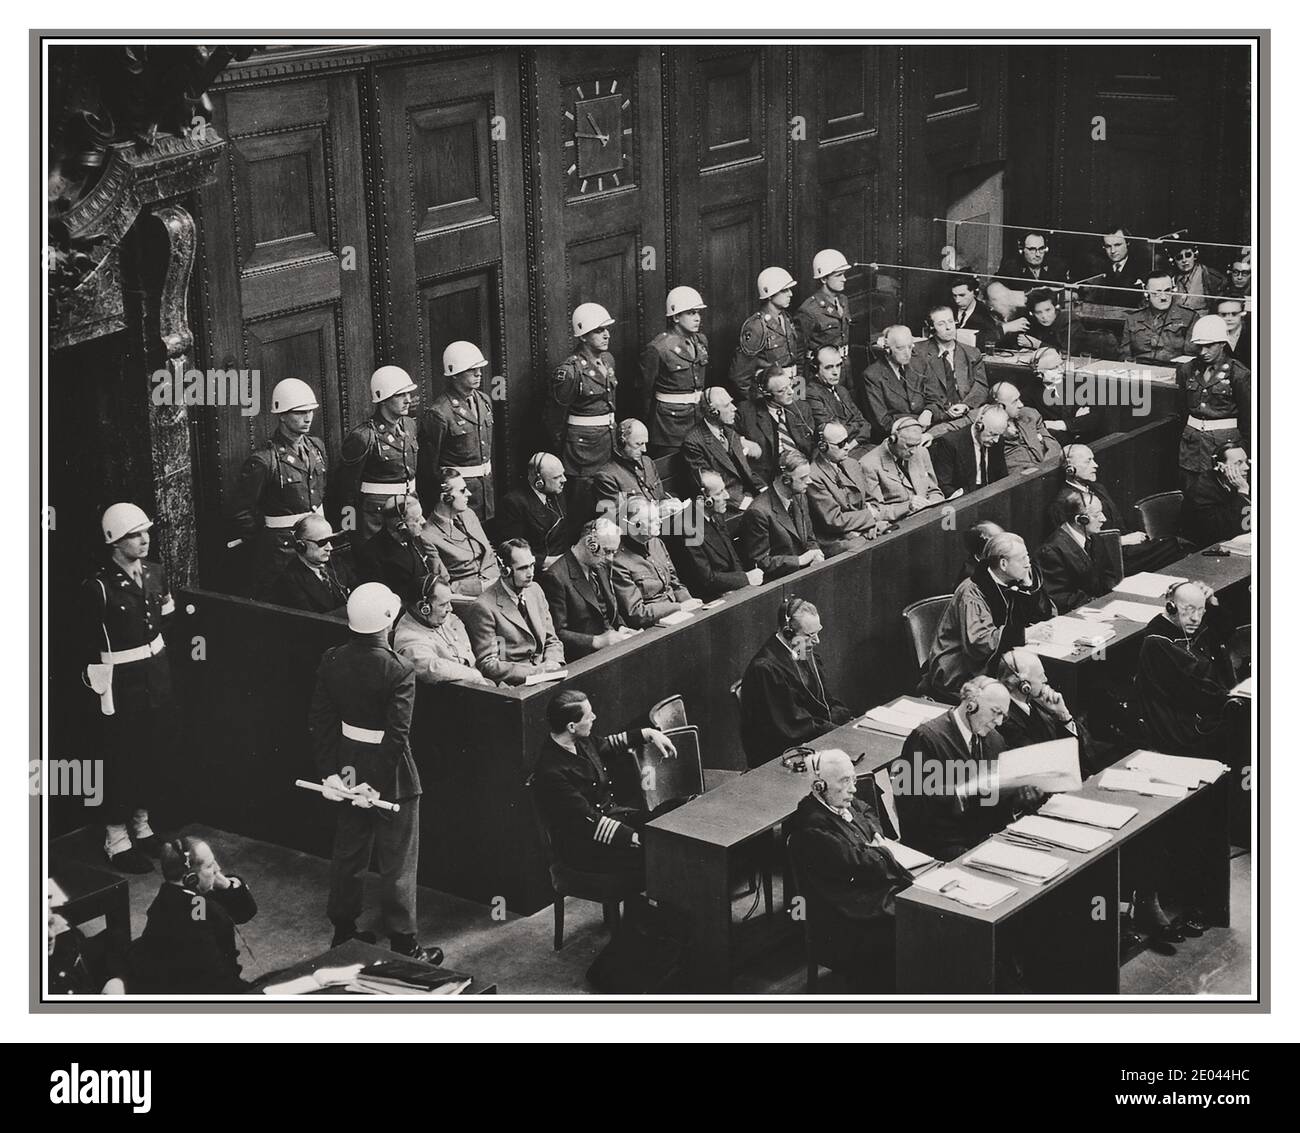 WW2 Nuremberg war crimes trials Germany The Nuremberg trials were a series of military tribunals held after World War II by the Allied forces under international law and the trial laws of war. Nuremberg, Germany        20 Nov 1945 – 1 Oct 1946 Court: International Military Tribunal Decided: September 30 – October 1, 1946 Leading Nazis on trial included here : Hermann Goering, Rudolf Hess, Field Marshall Keitel, Albert Speer. etc., Stock Photo